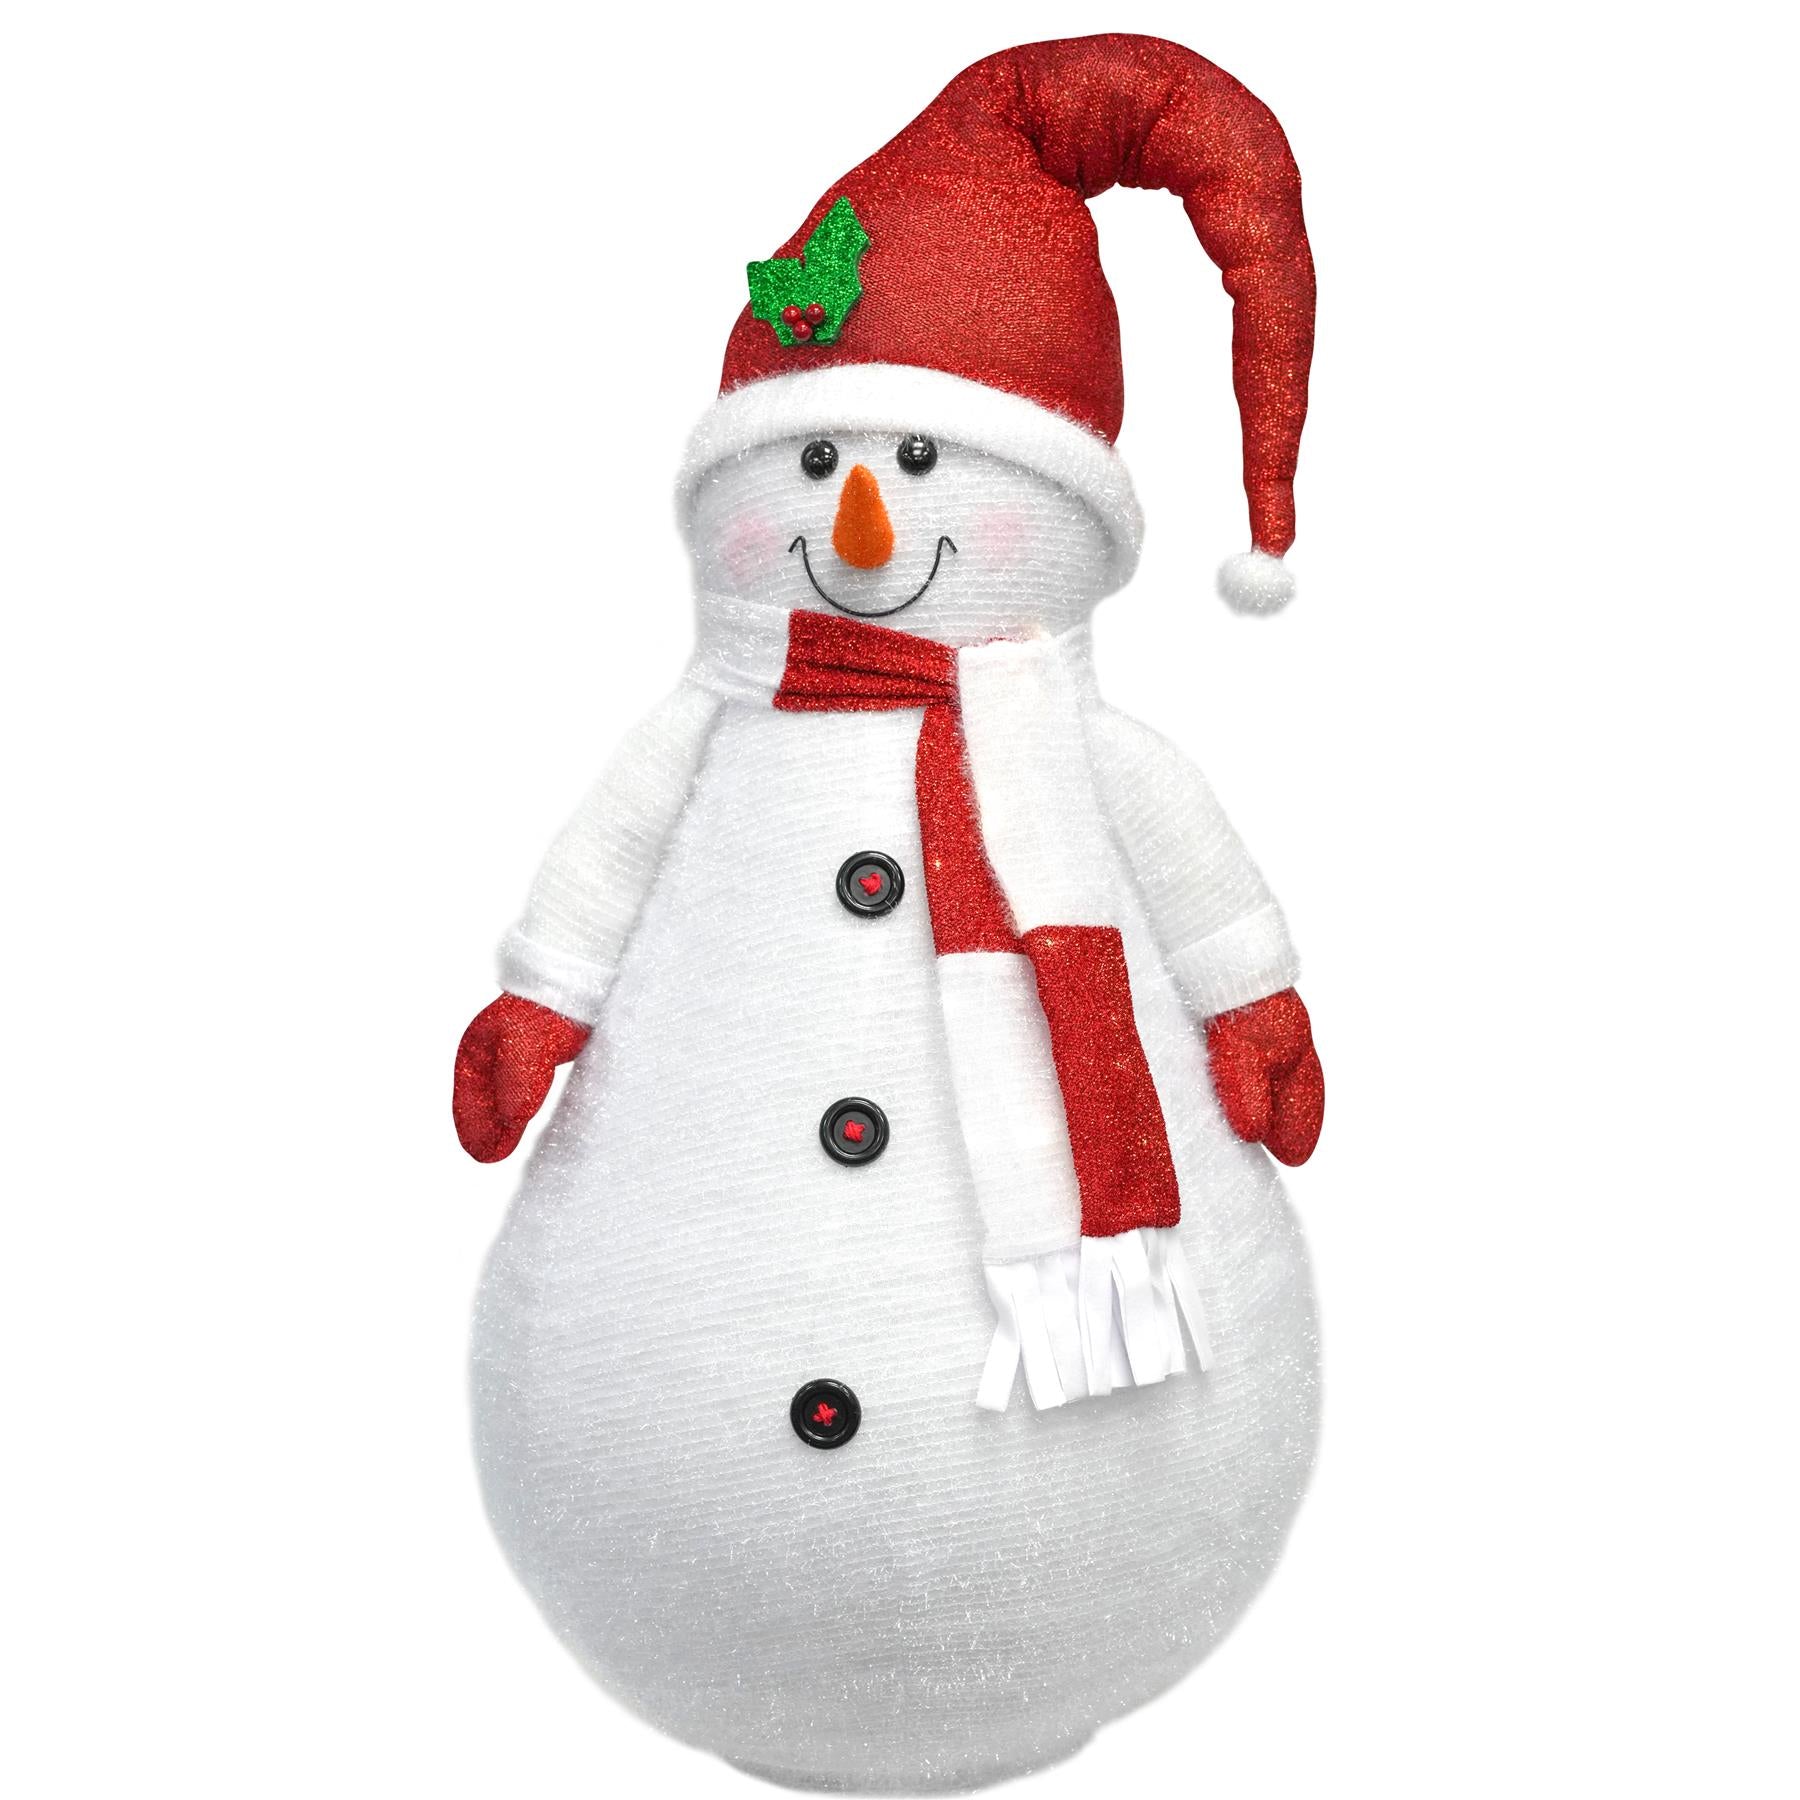 The Magic Toy Shop Christmas Decoration Collapsible Snowman Christmas Decoration with LED lights